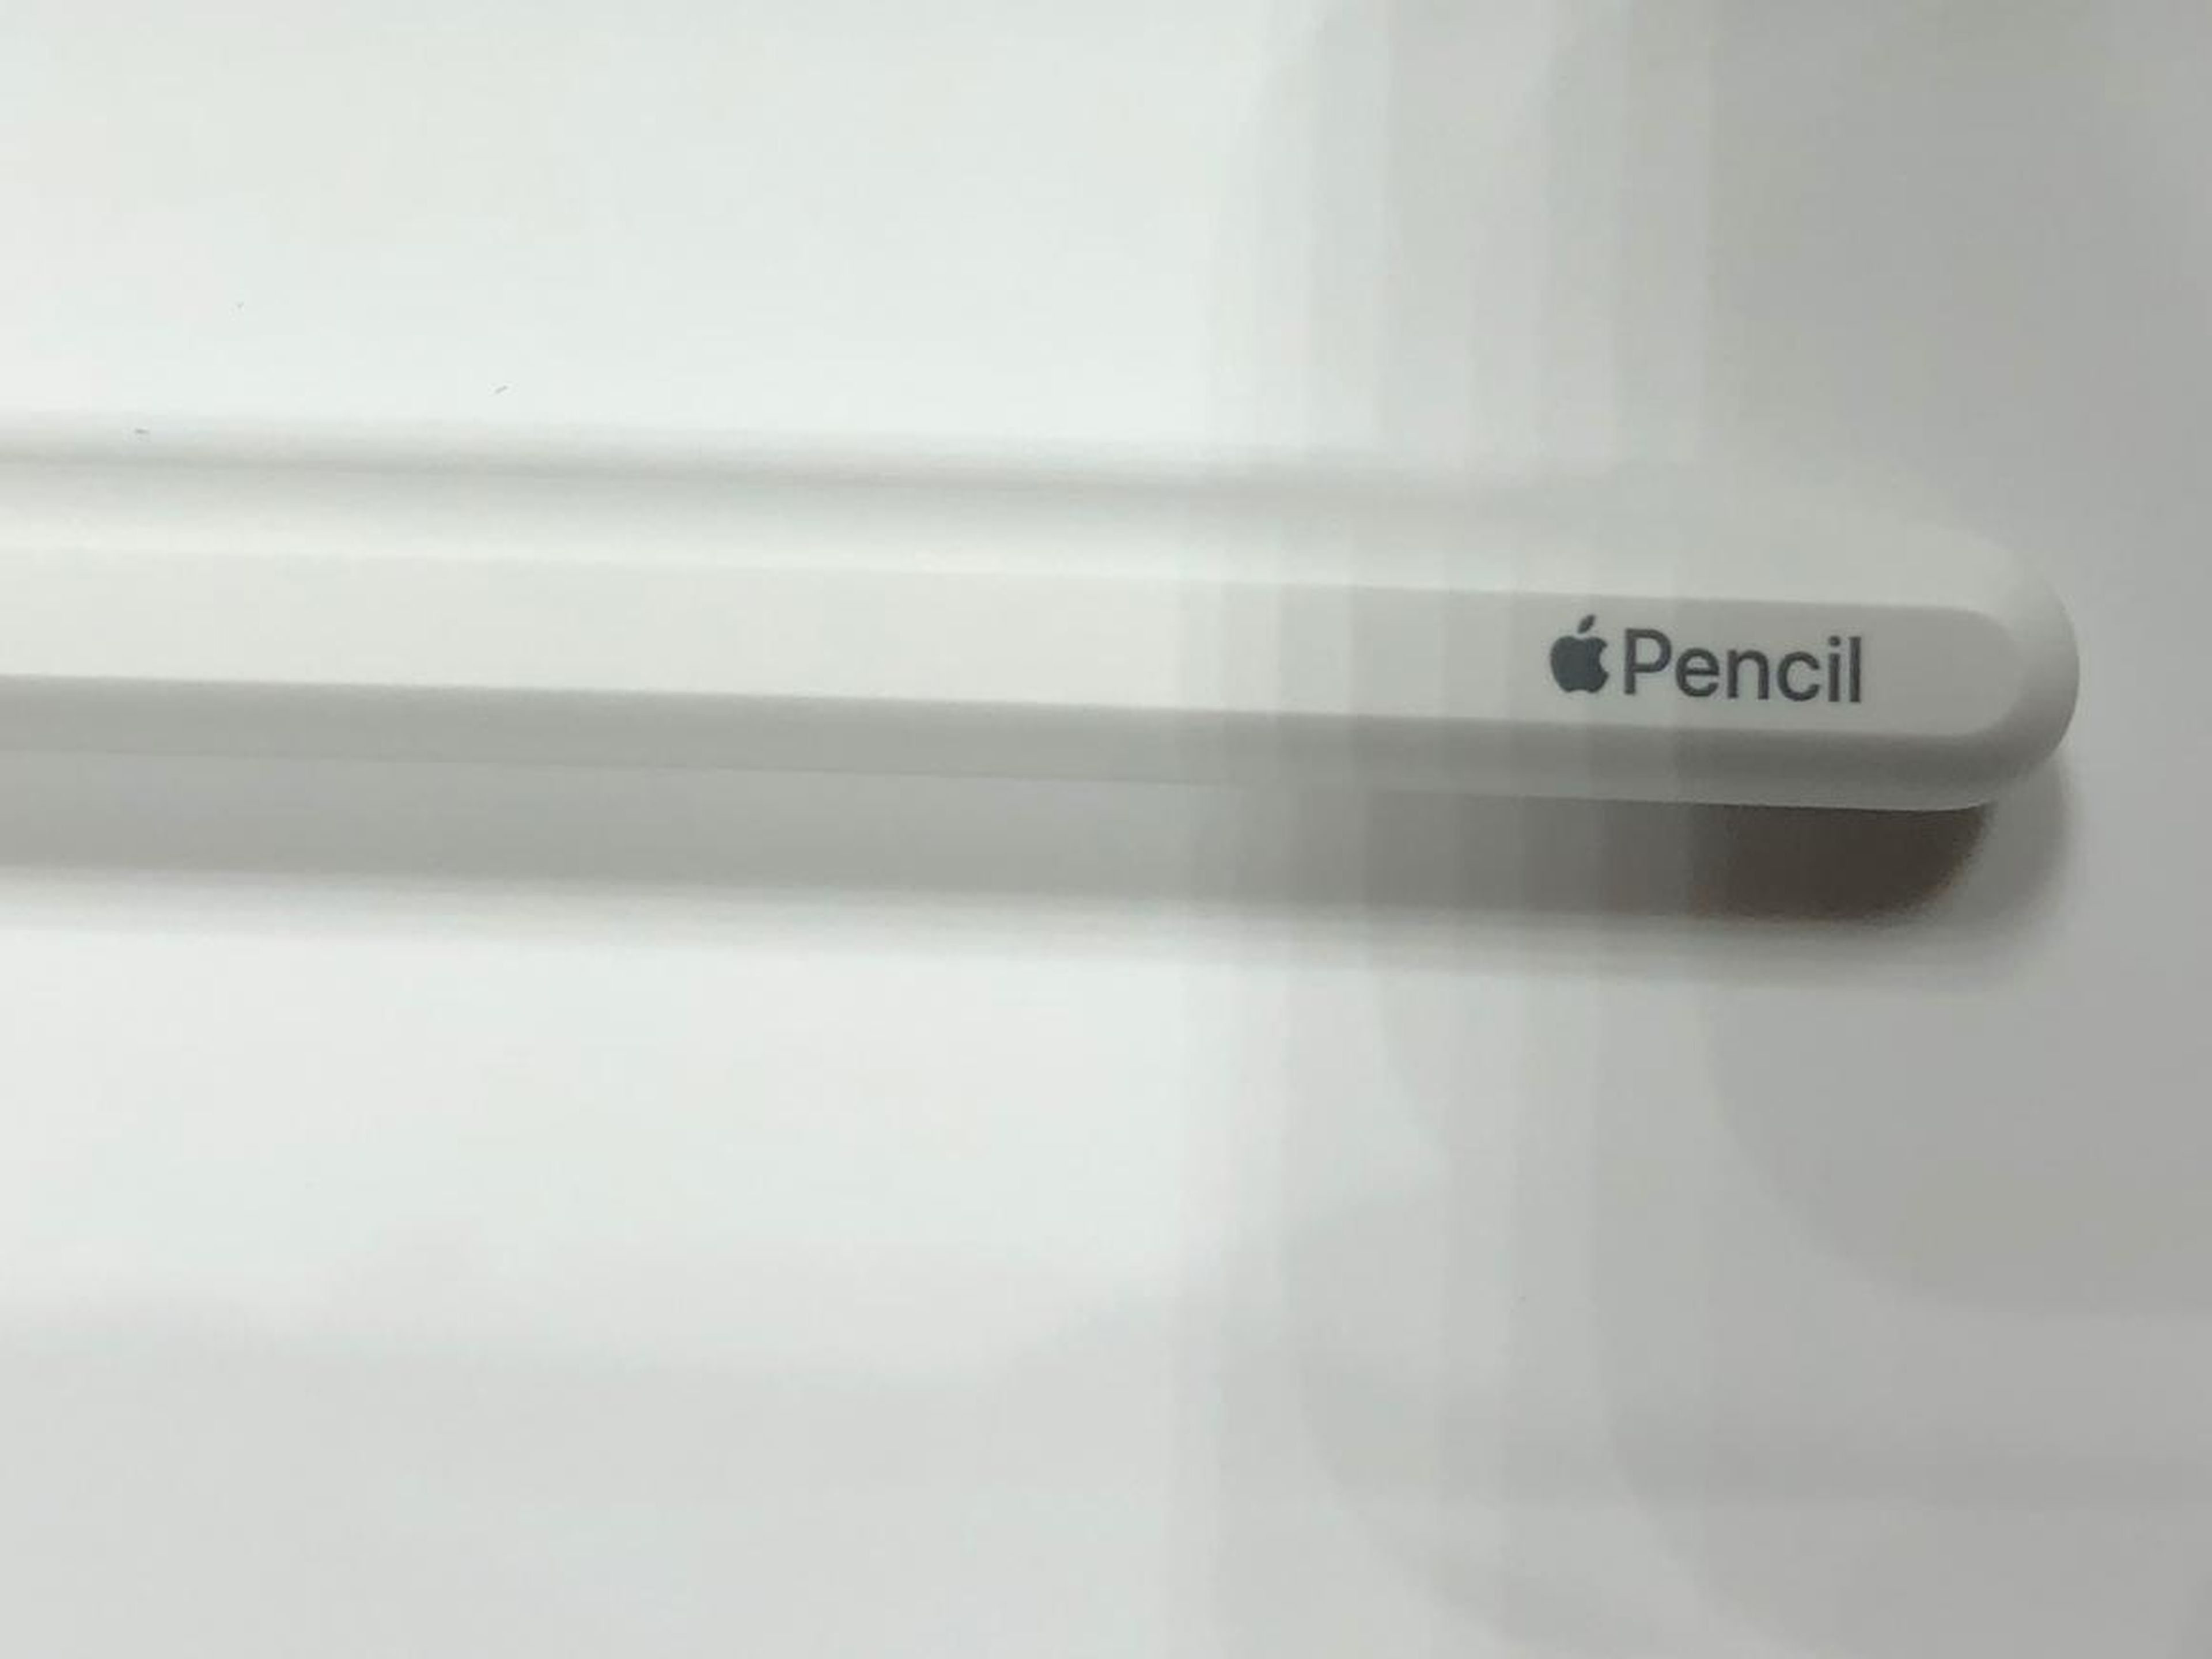 Although the Pencil is now squared off, it still rolls.